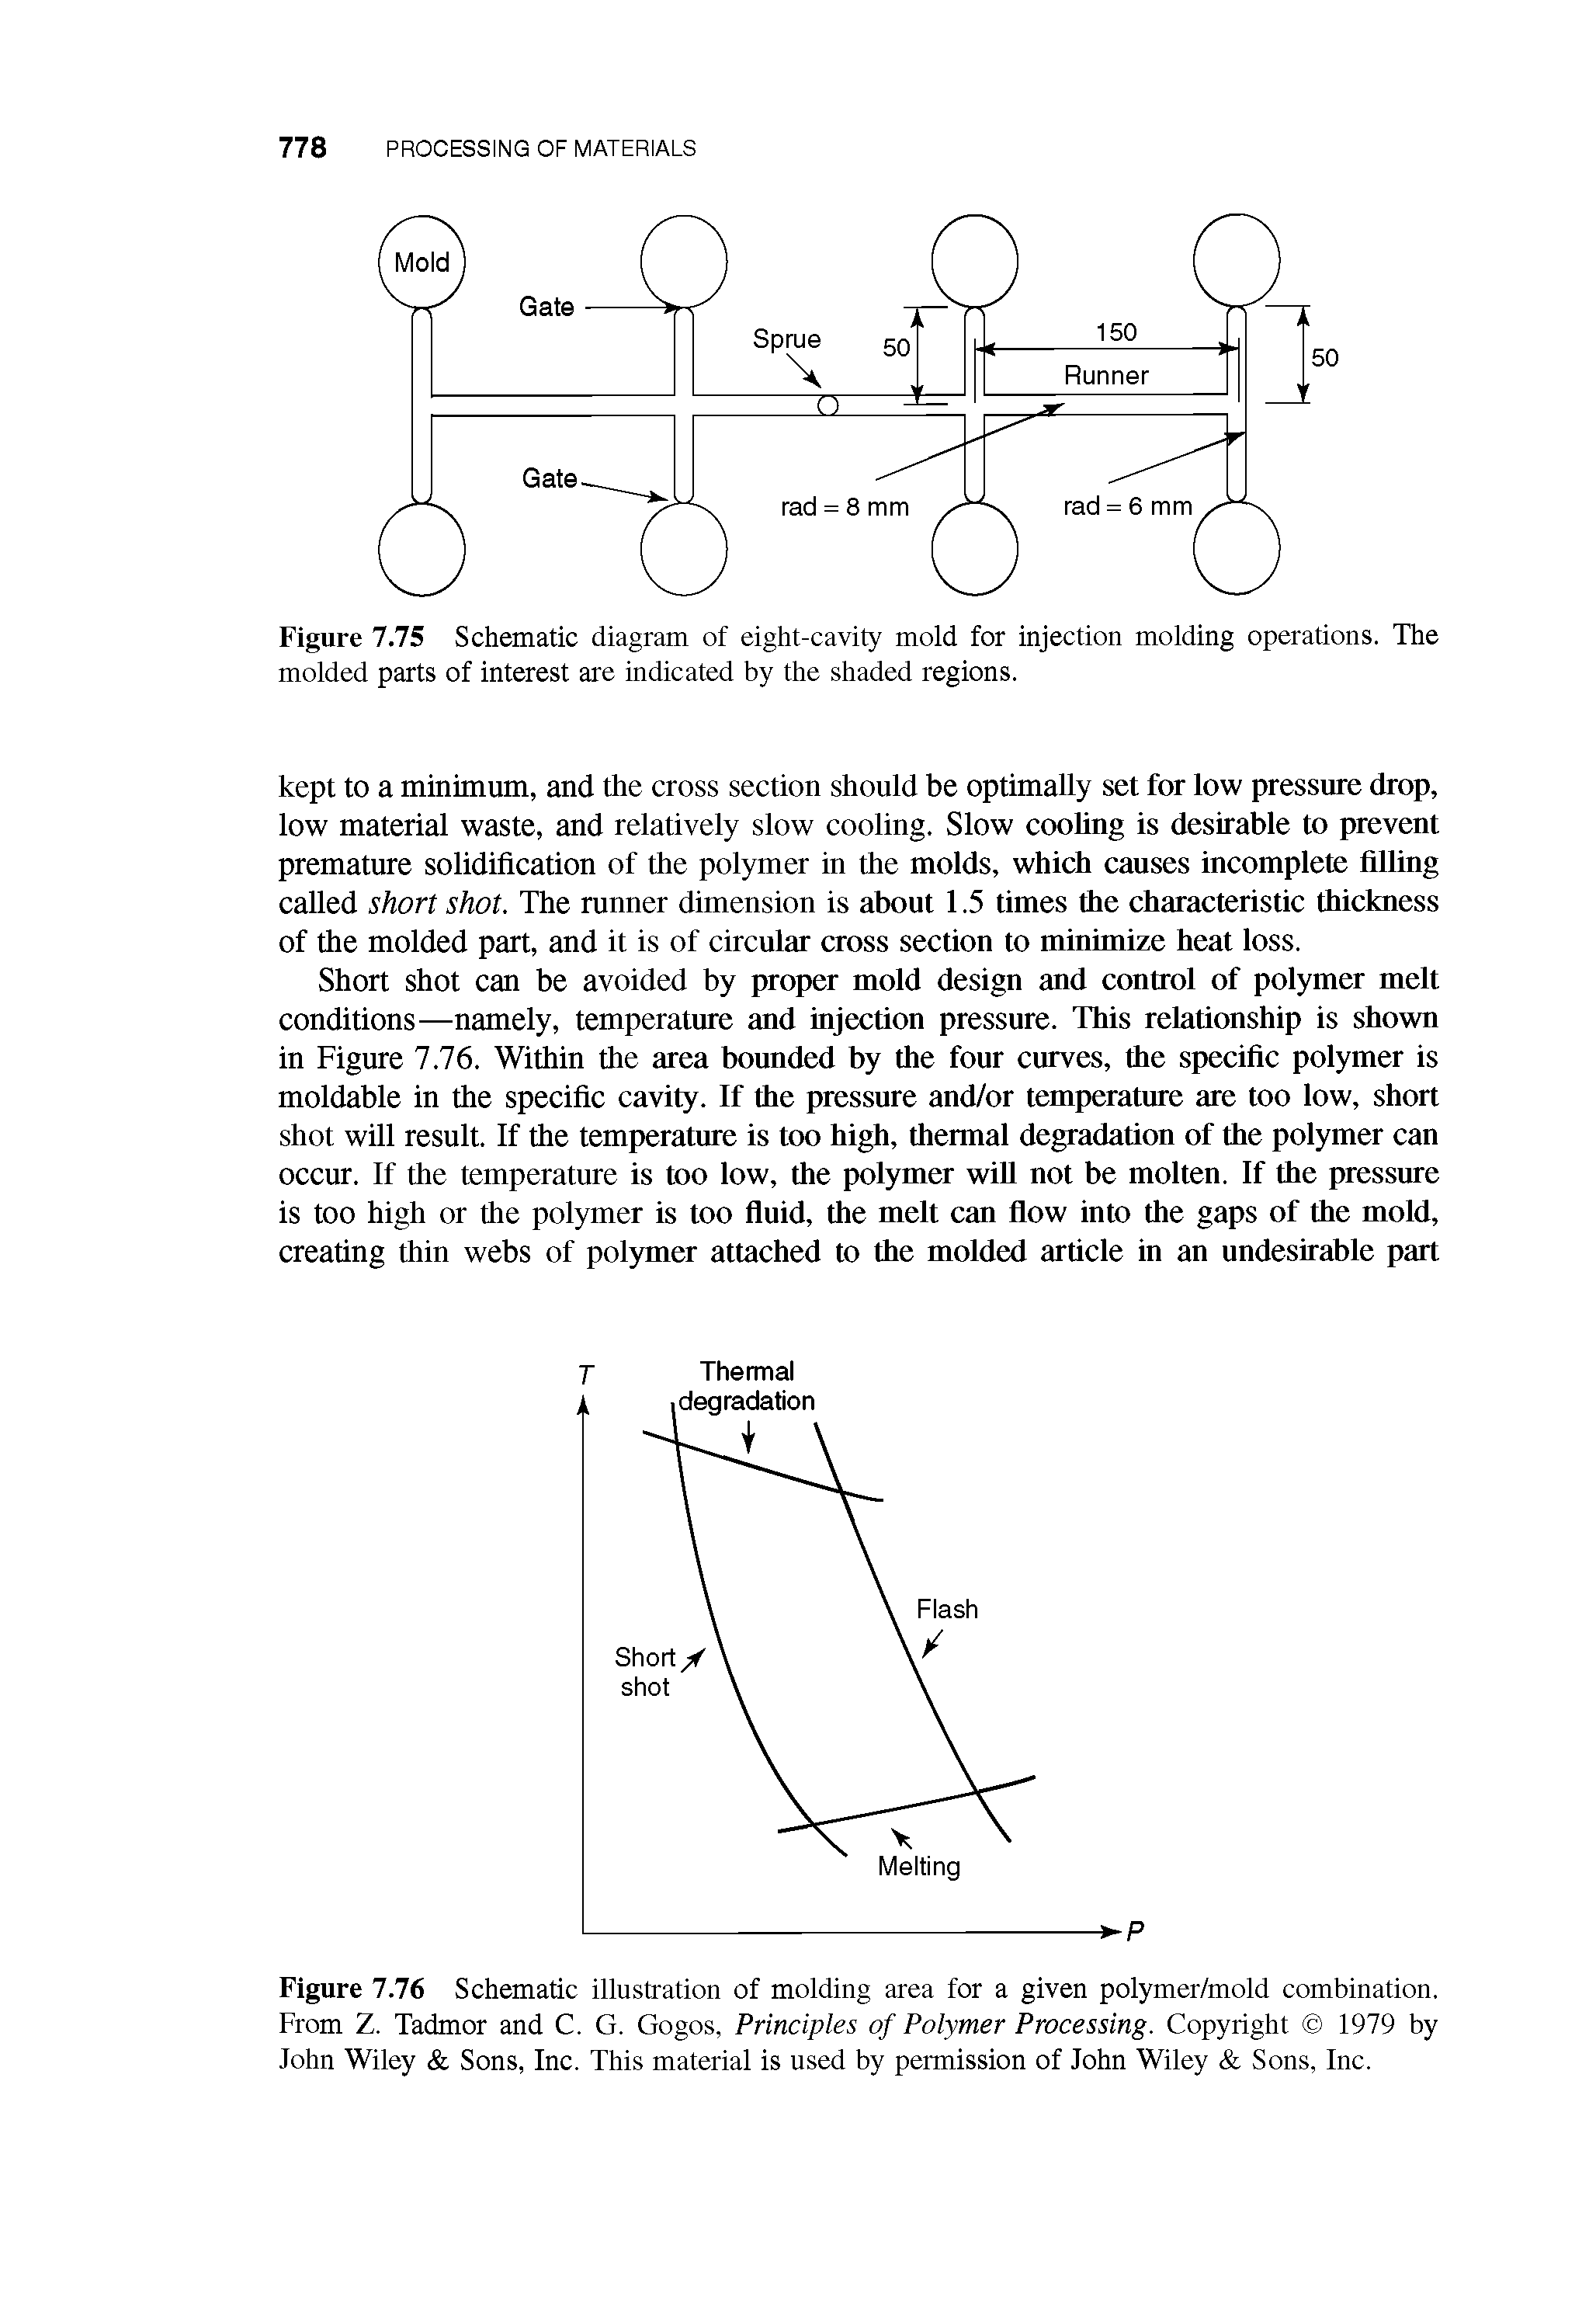 Figure 7.76 Schematic illustration of molding area for a given polymer/mold combination. From Z. Tadmor and C. G. Gogos, Principles of Polymer Processing. Copyright 1979 by John Wiley Sons, Inc. This material is used by permission of John Wiley Sons, Inc.